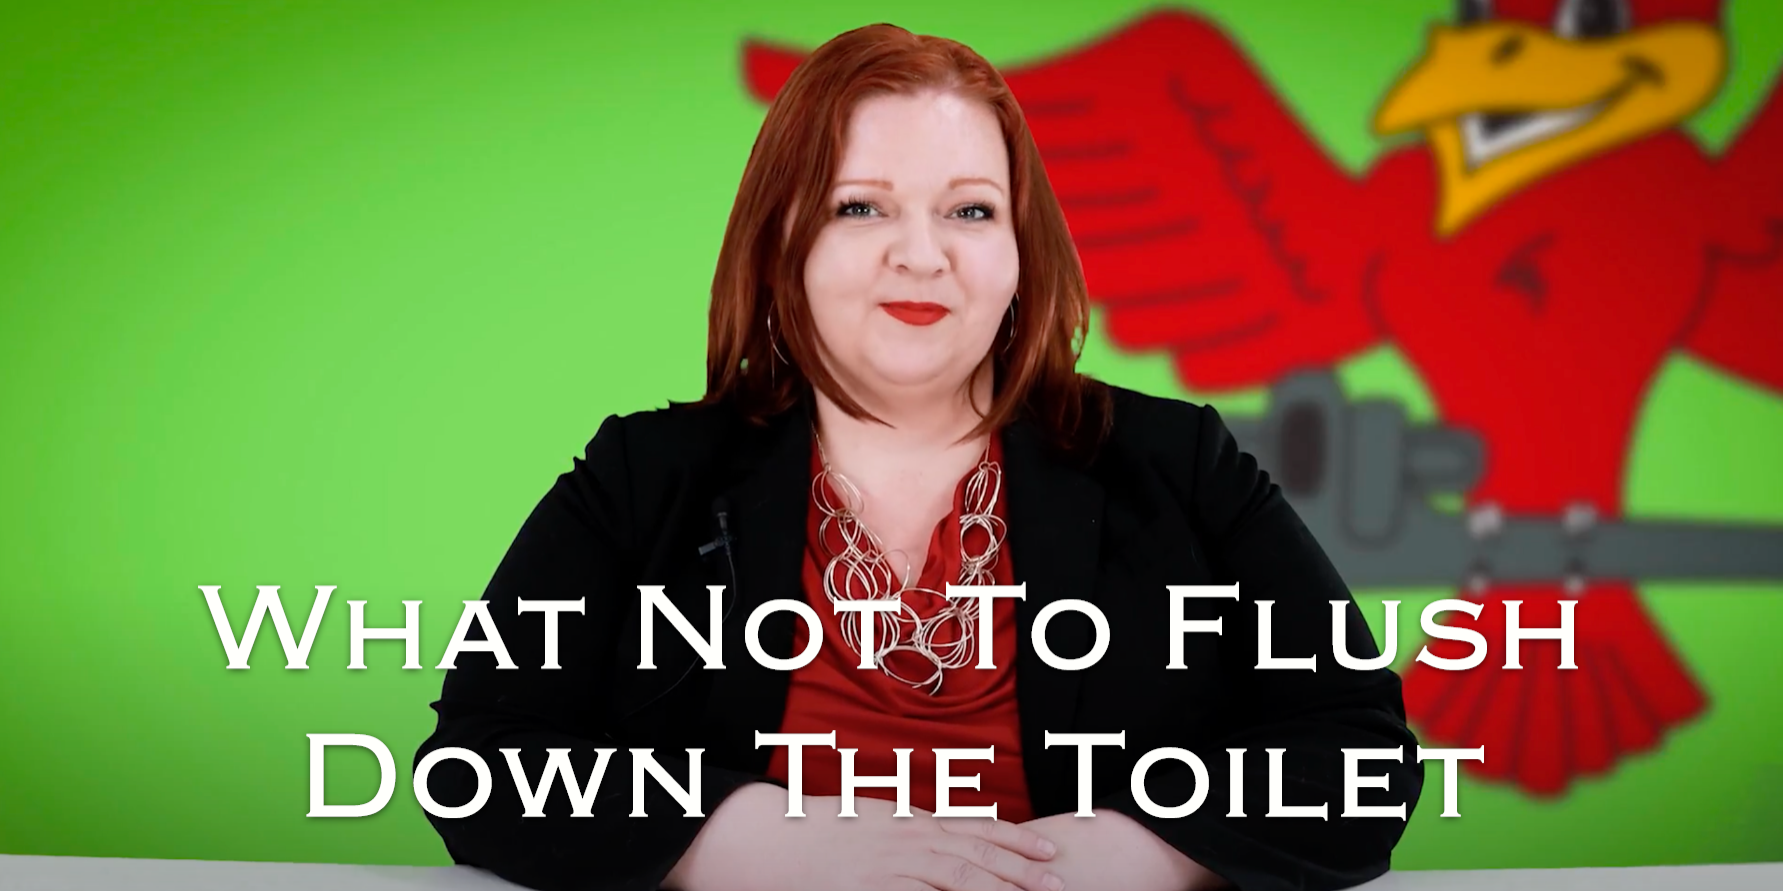 Owner of Robins Plumbing, Stephanie Robins with featured blog titled 'what not to flush down the toilet'.